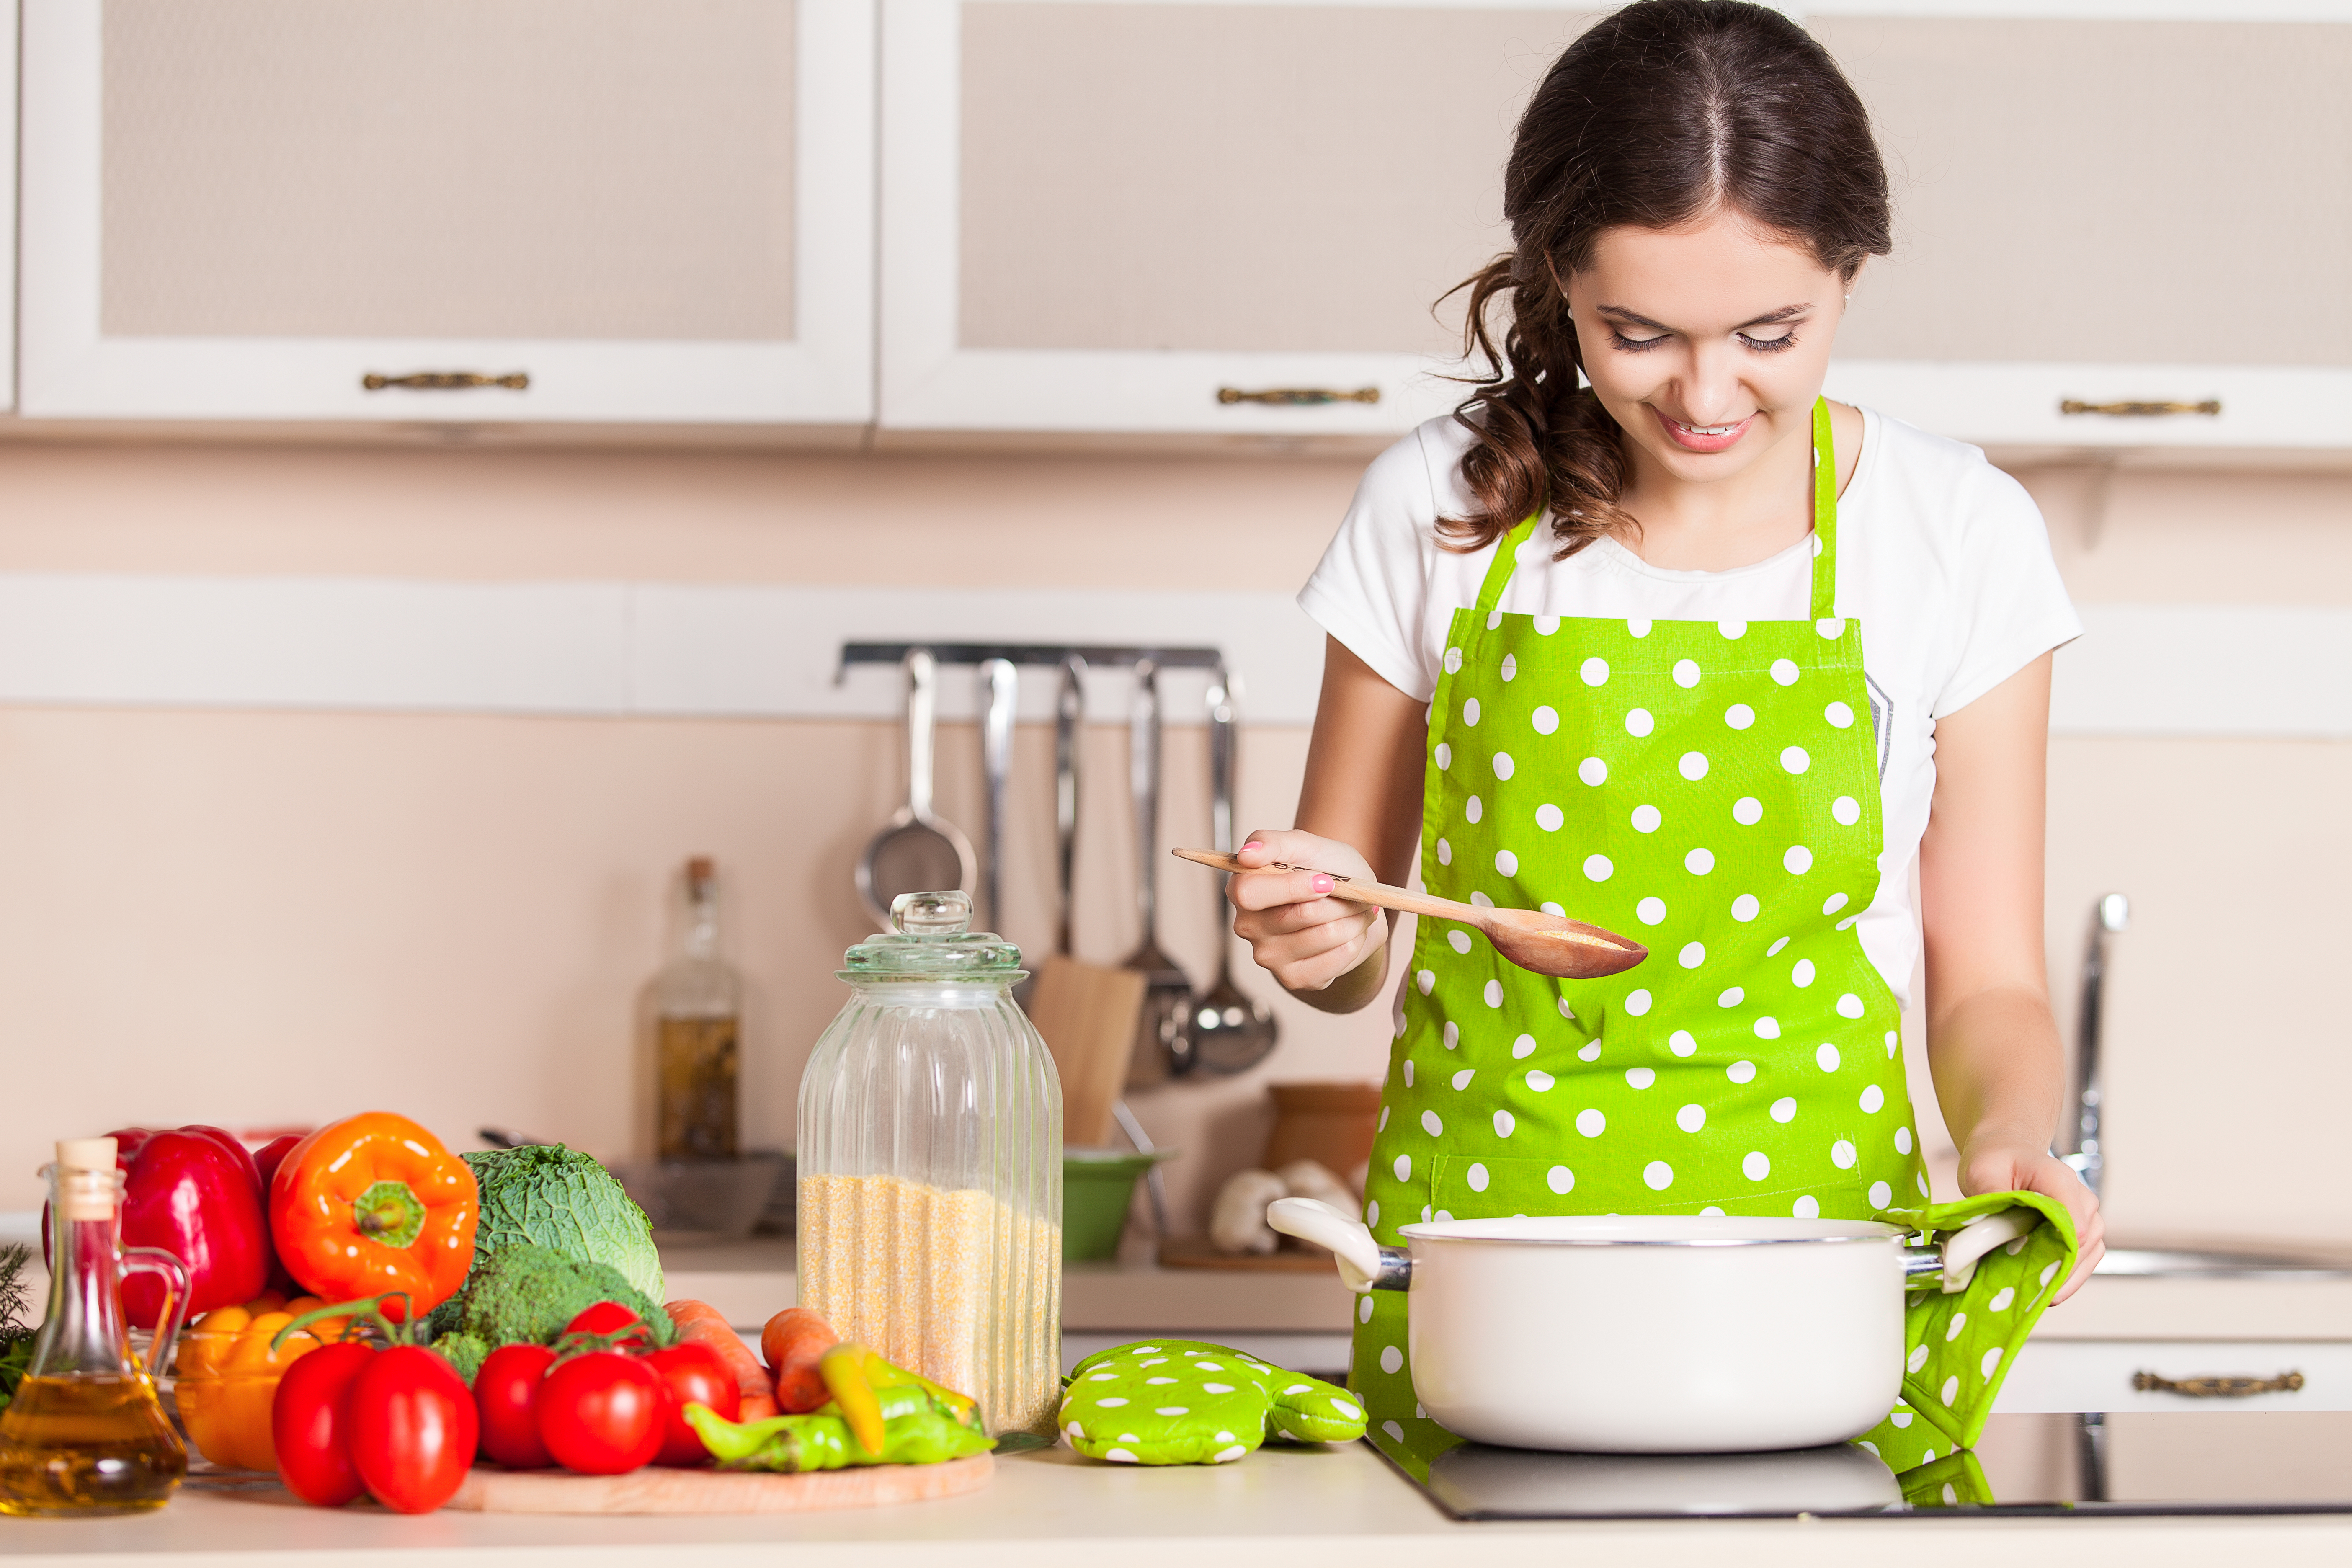 Easy Tips for Making Healthier, Faster Meals For Your Family